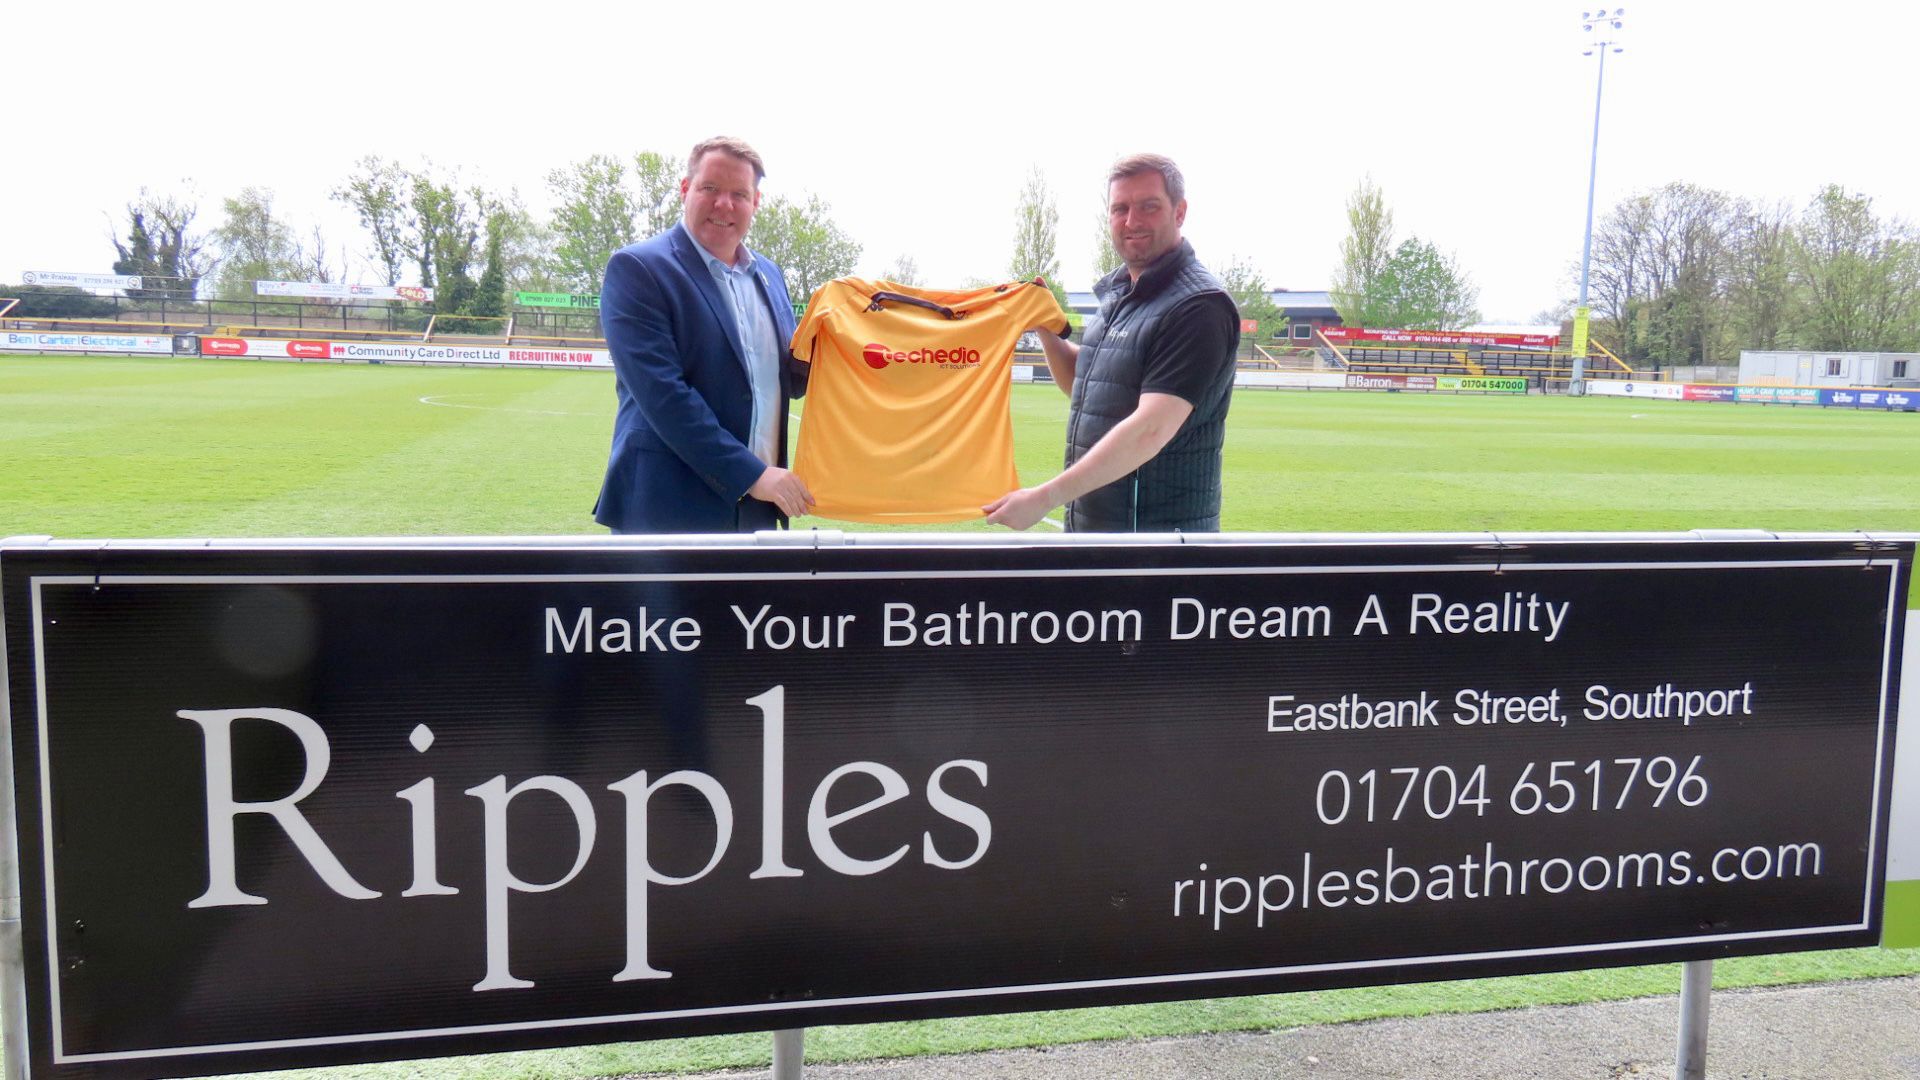 Ripples owner Daniel Doherty with Steven Brown of Southport Football Club. Photo by Andrew Brown of Stand Up For Southport